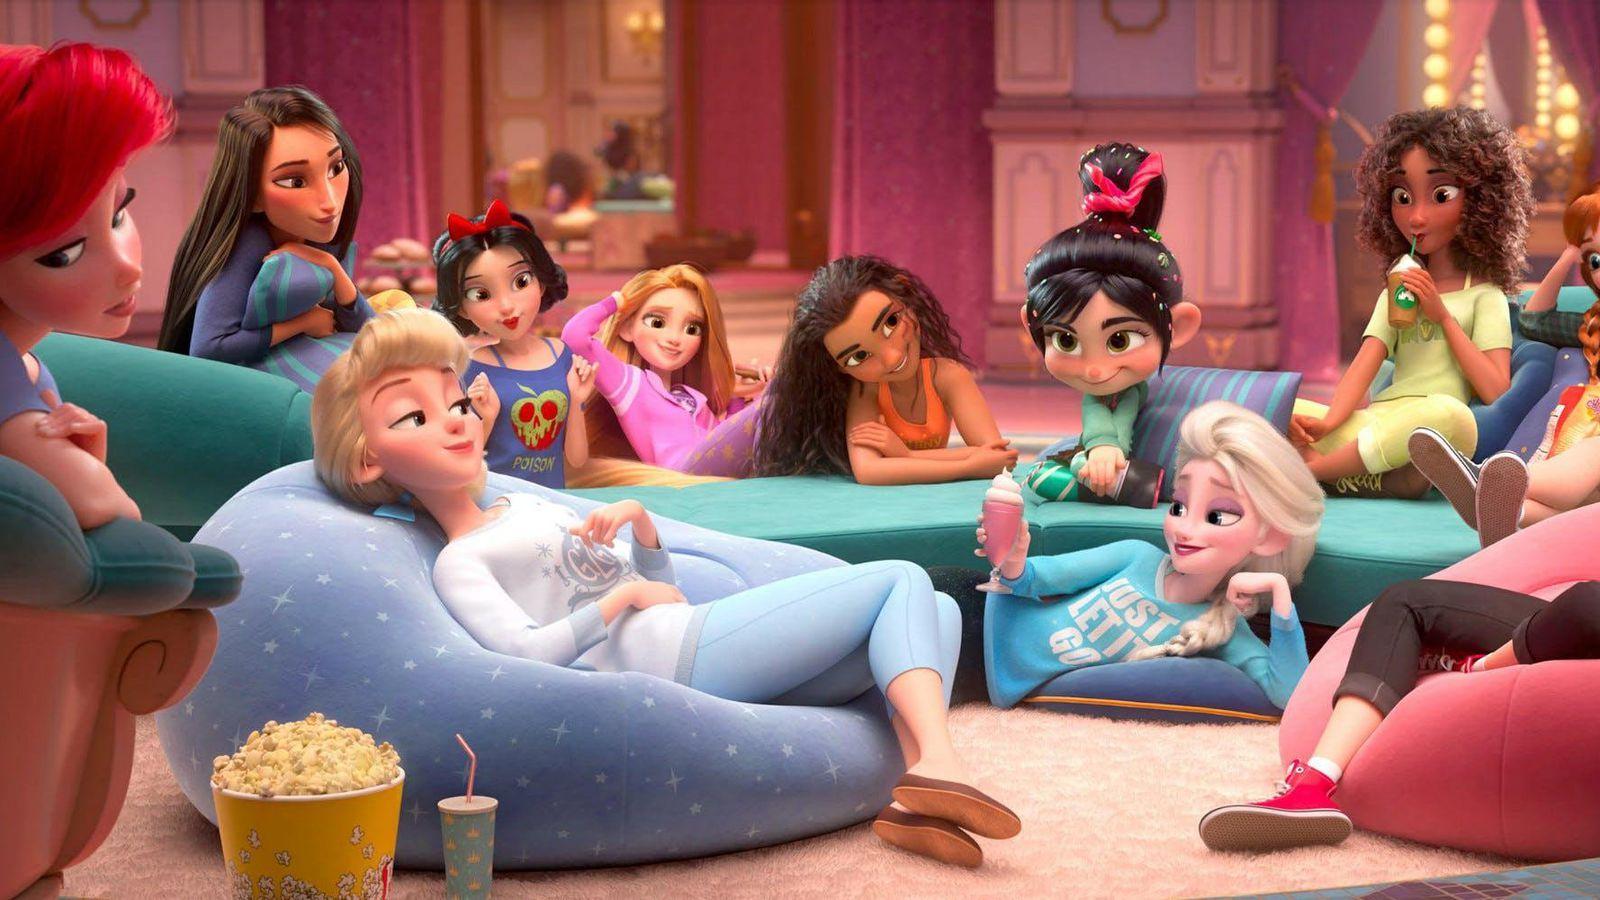 See the Disney princesses lounge around in sweats